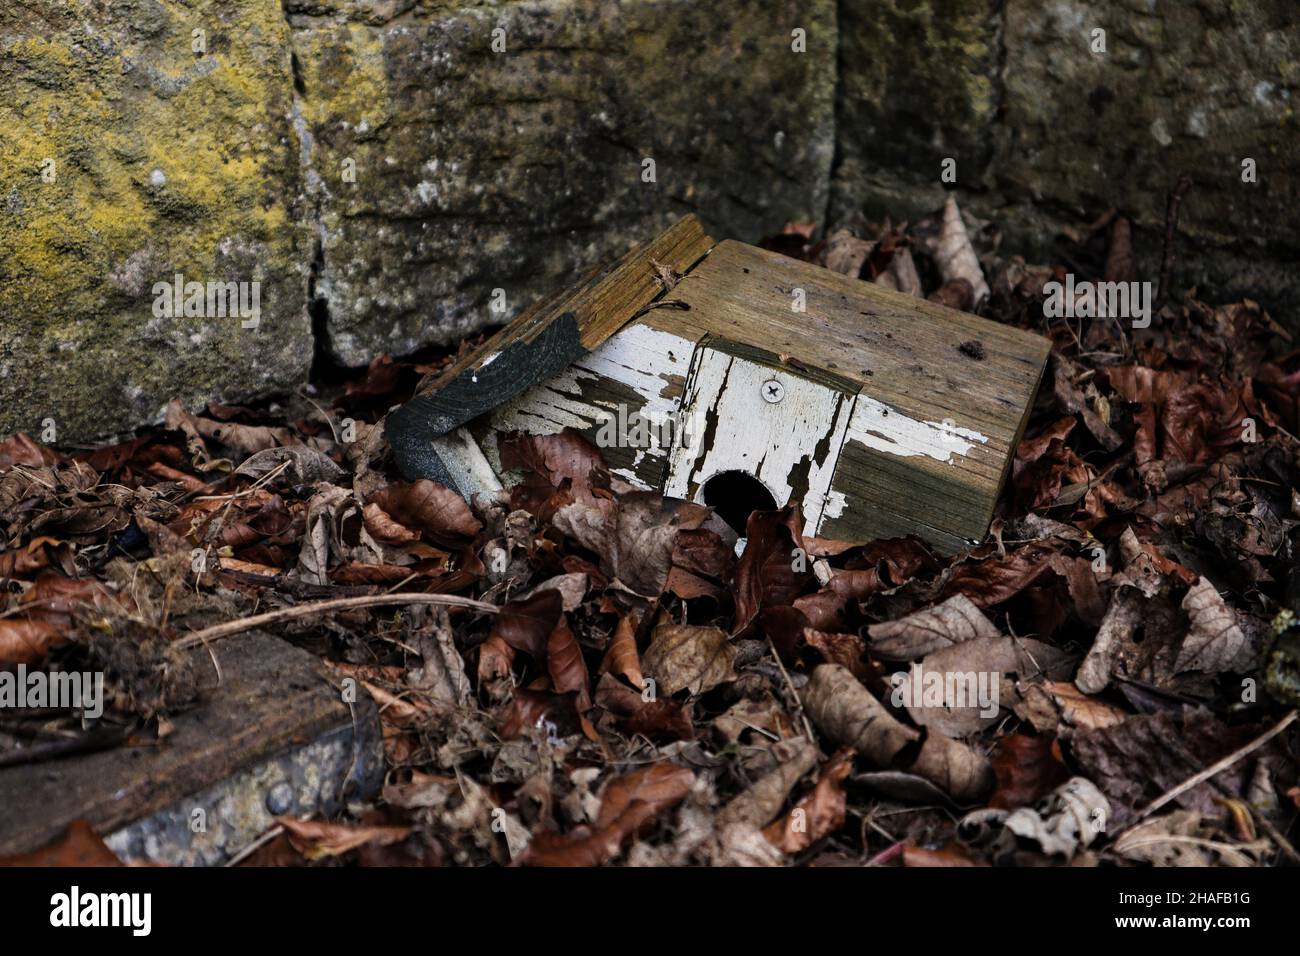 an old worn bird box lying in dead leaves Stock Photo